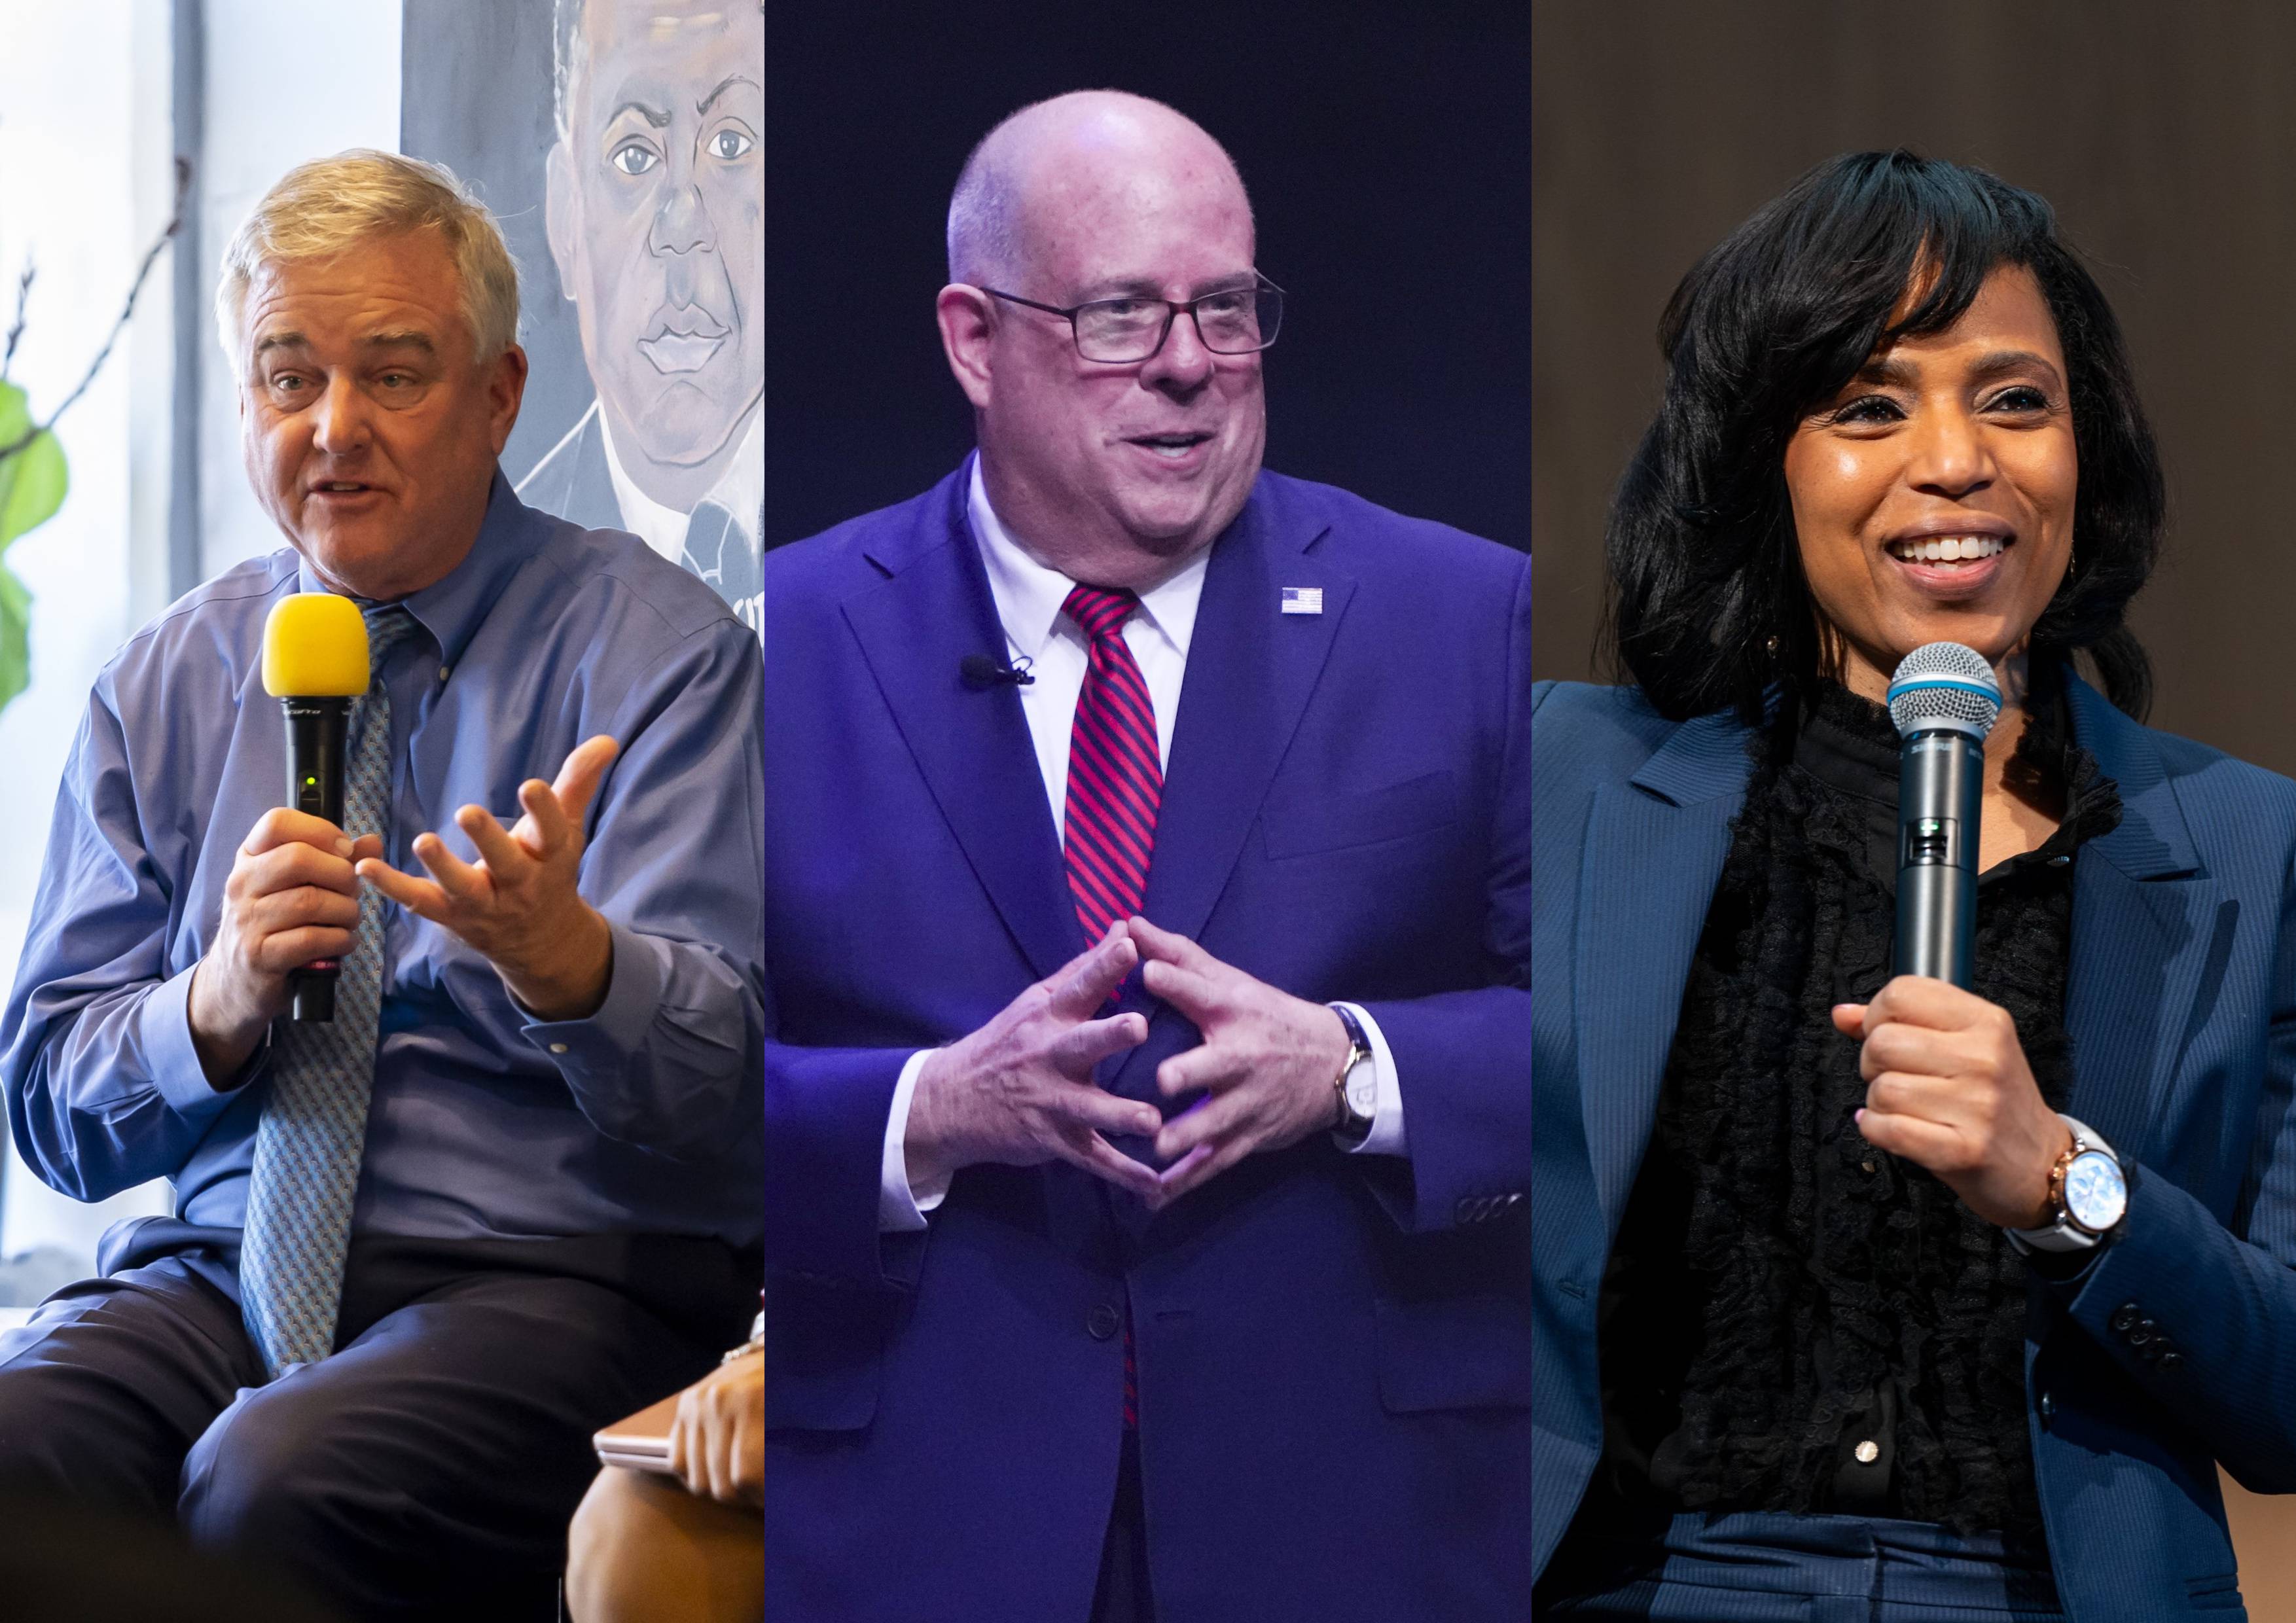 Leading candidates for the U.S. Senate in Maryland in 2024 are, from left: U.S. Rep David Trone, a Democrat; former Gov. Larry Hogan, a Republican; and Prince George's County Executive Angela Alsobrooks.